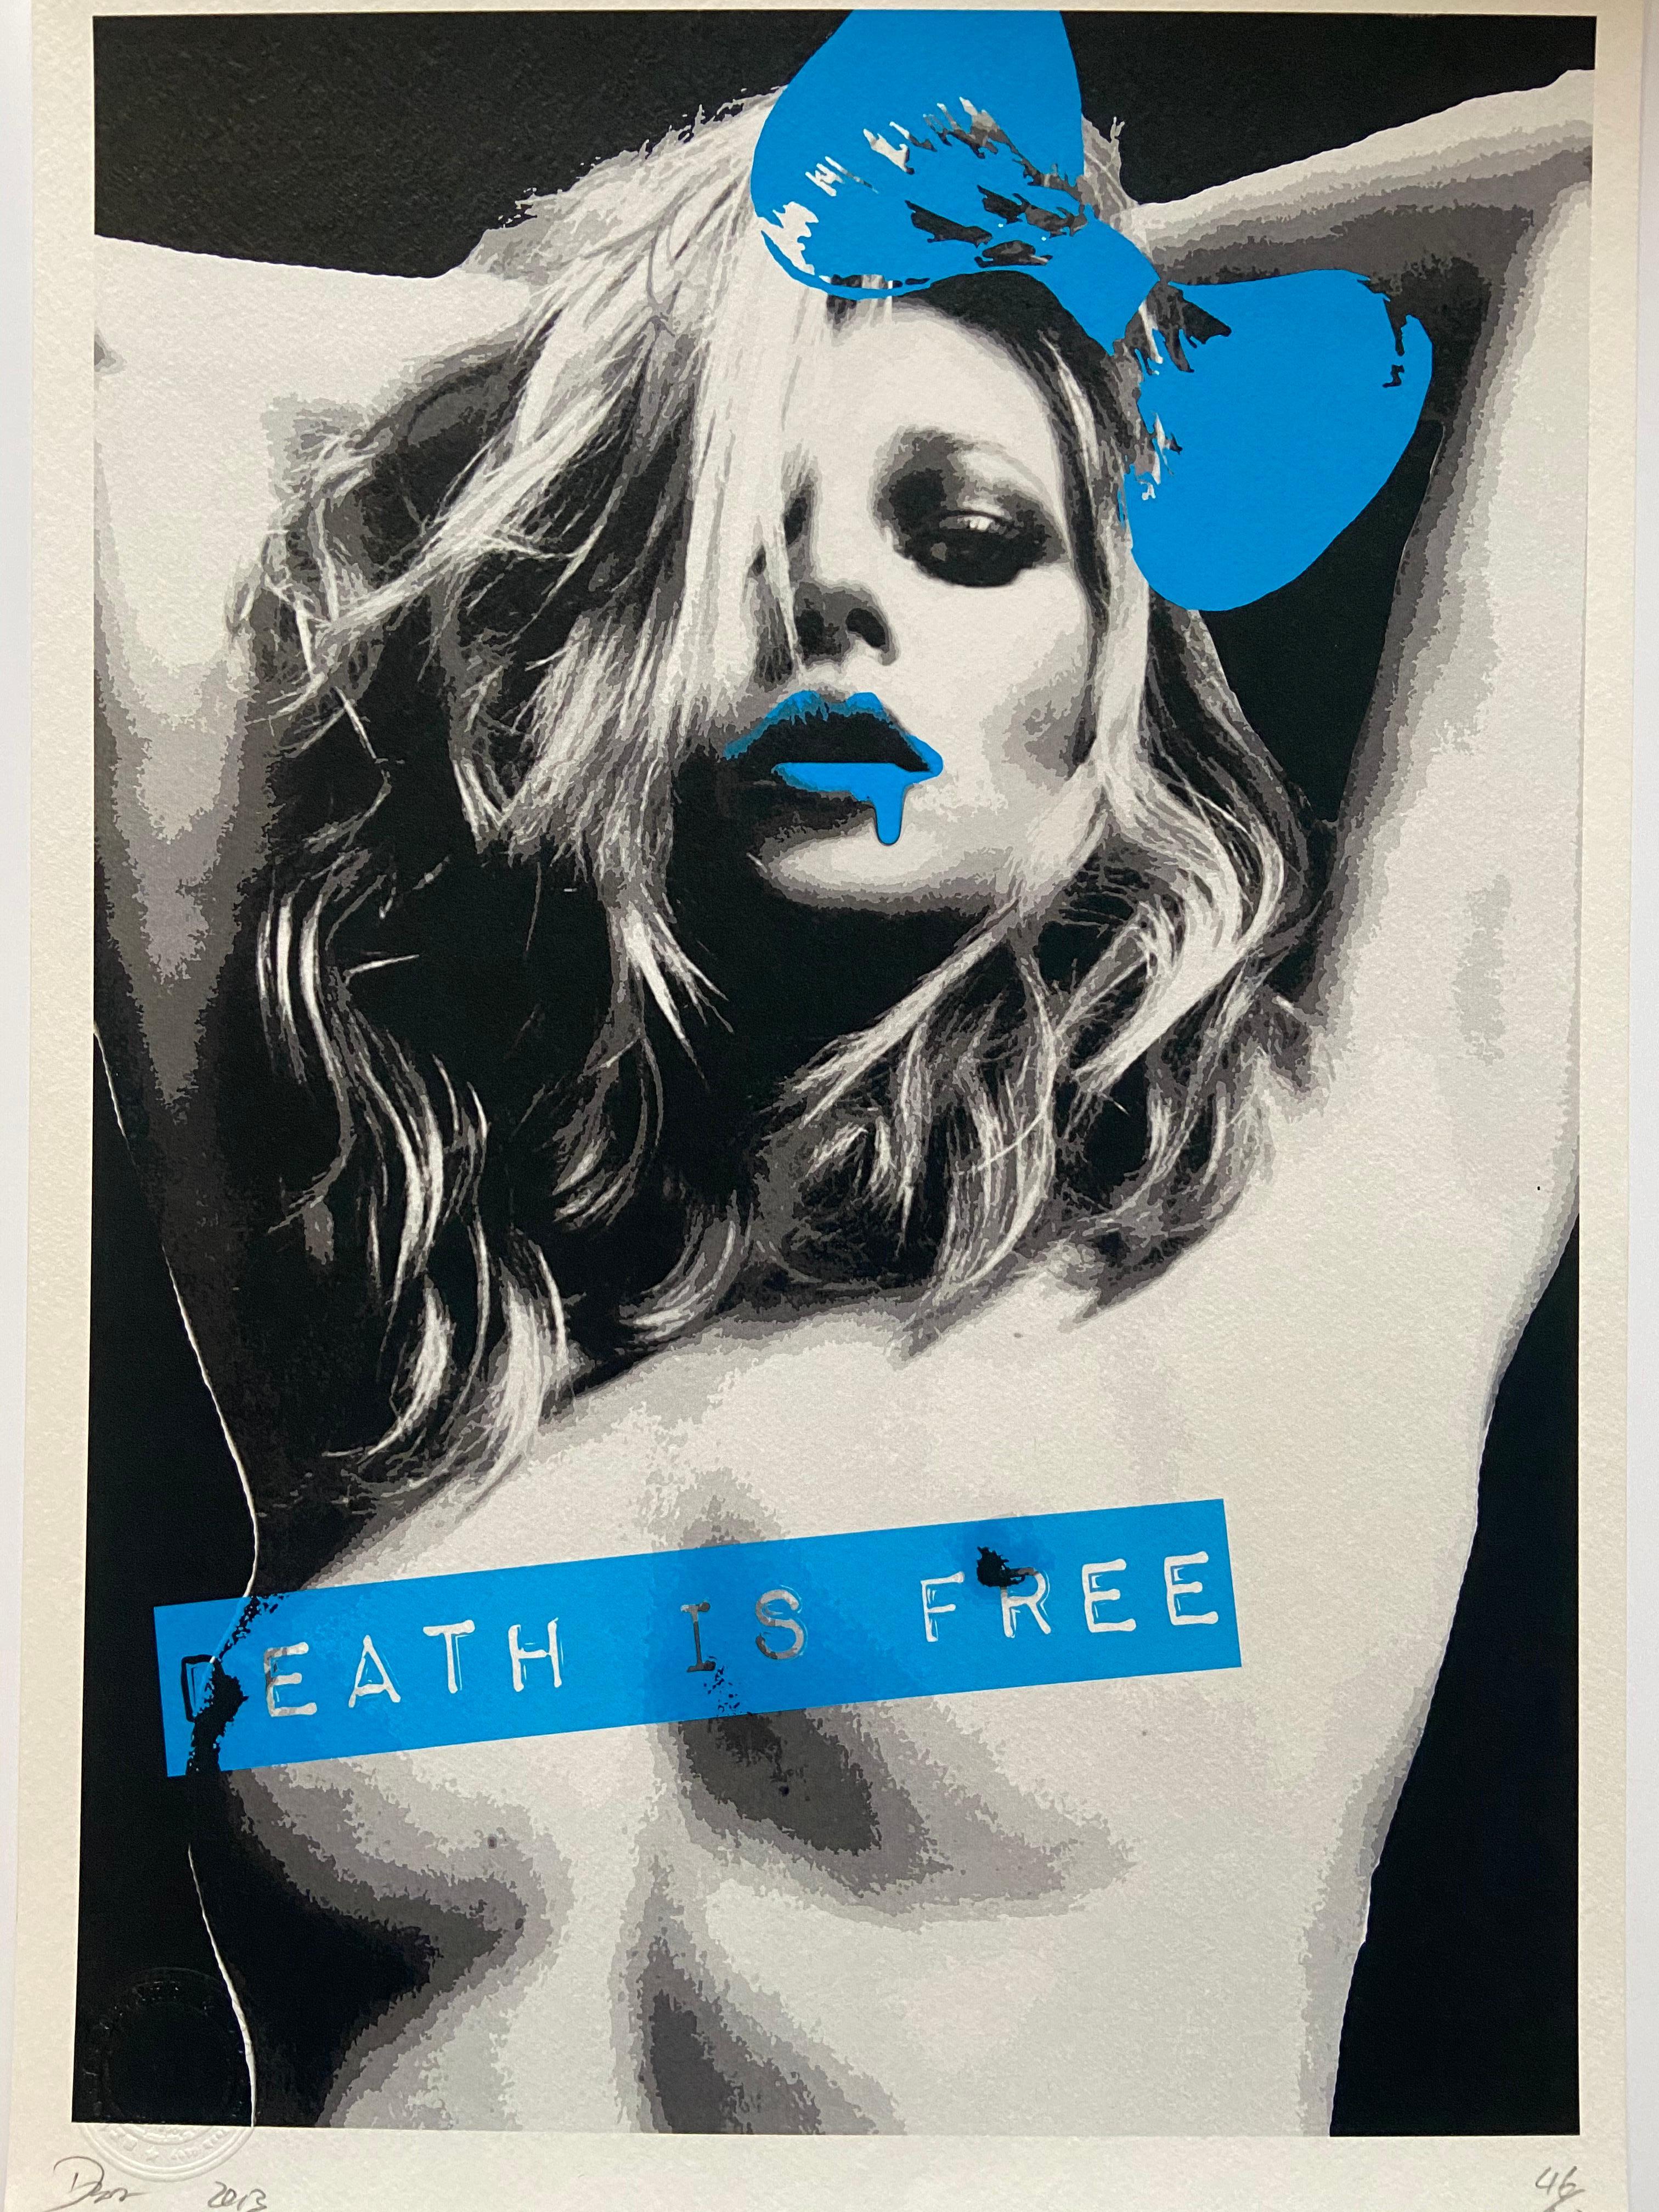 Death NYC - Blue Death is free - 2013 
Silkscreen print signed, numbered and dated in pencil
Dry stamp
2 artist's certificates
45 x 32 cms 
129 euros